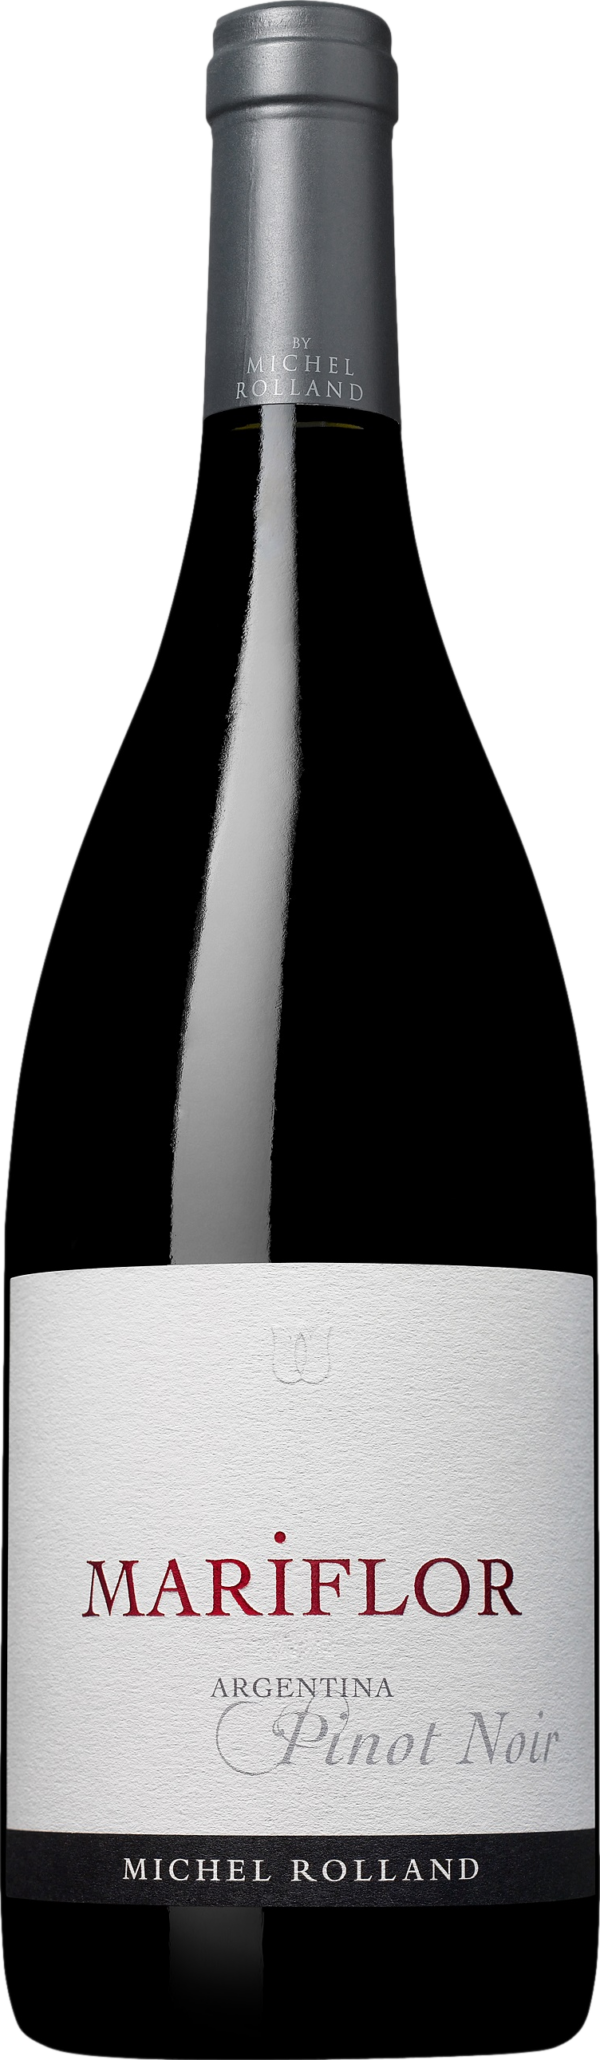 Product image of Michel Rolland Mariflor Pinot Noir 2014 from 8wines